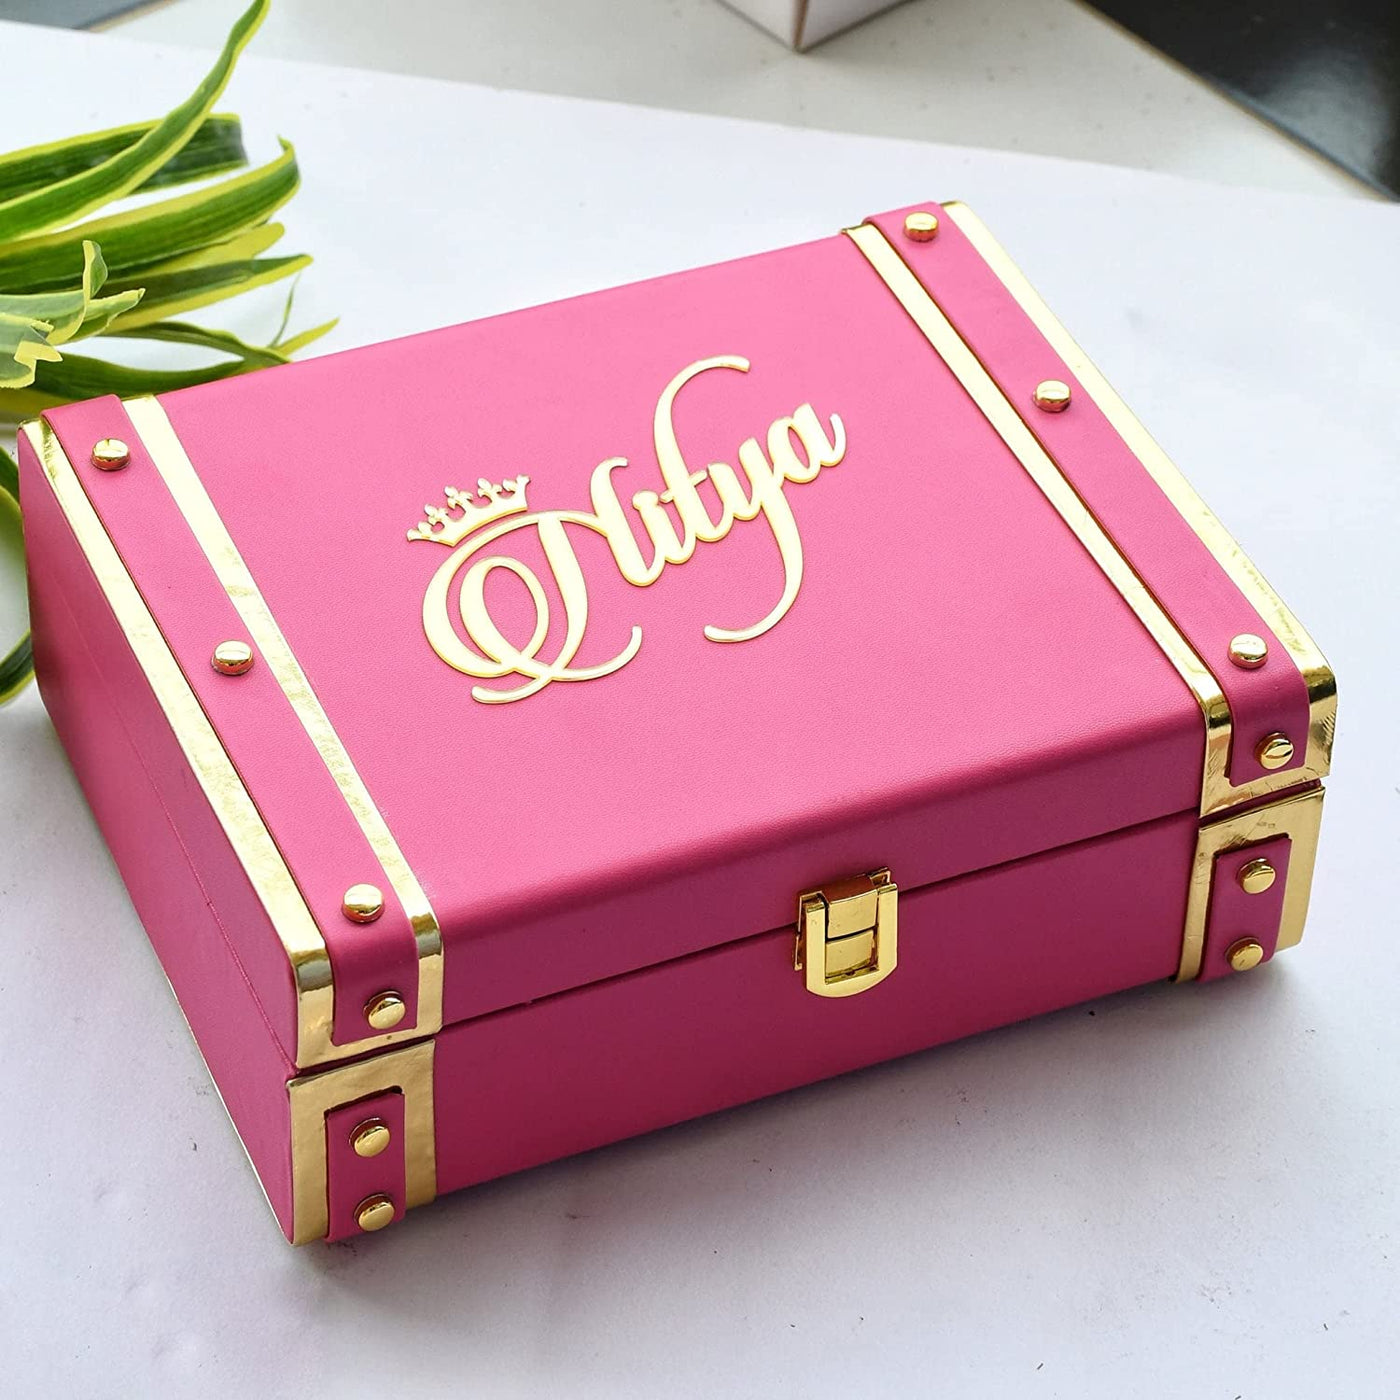 New Jaipur Handicraft Gift Trunks 💛 LAMANSH® Personalized Trunk boxes with custom name plates for Party & Anniversary Return Gifts 🎁